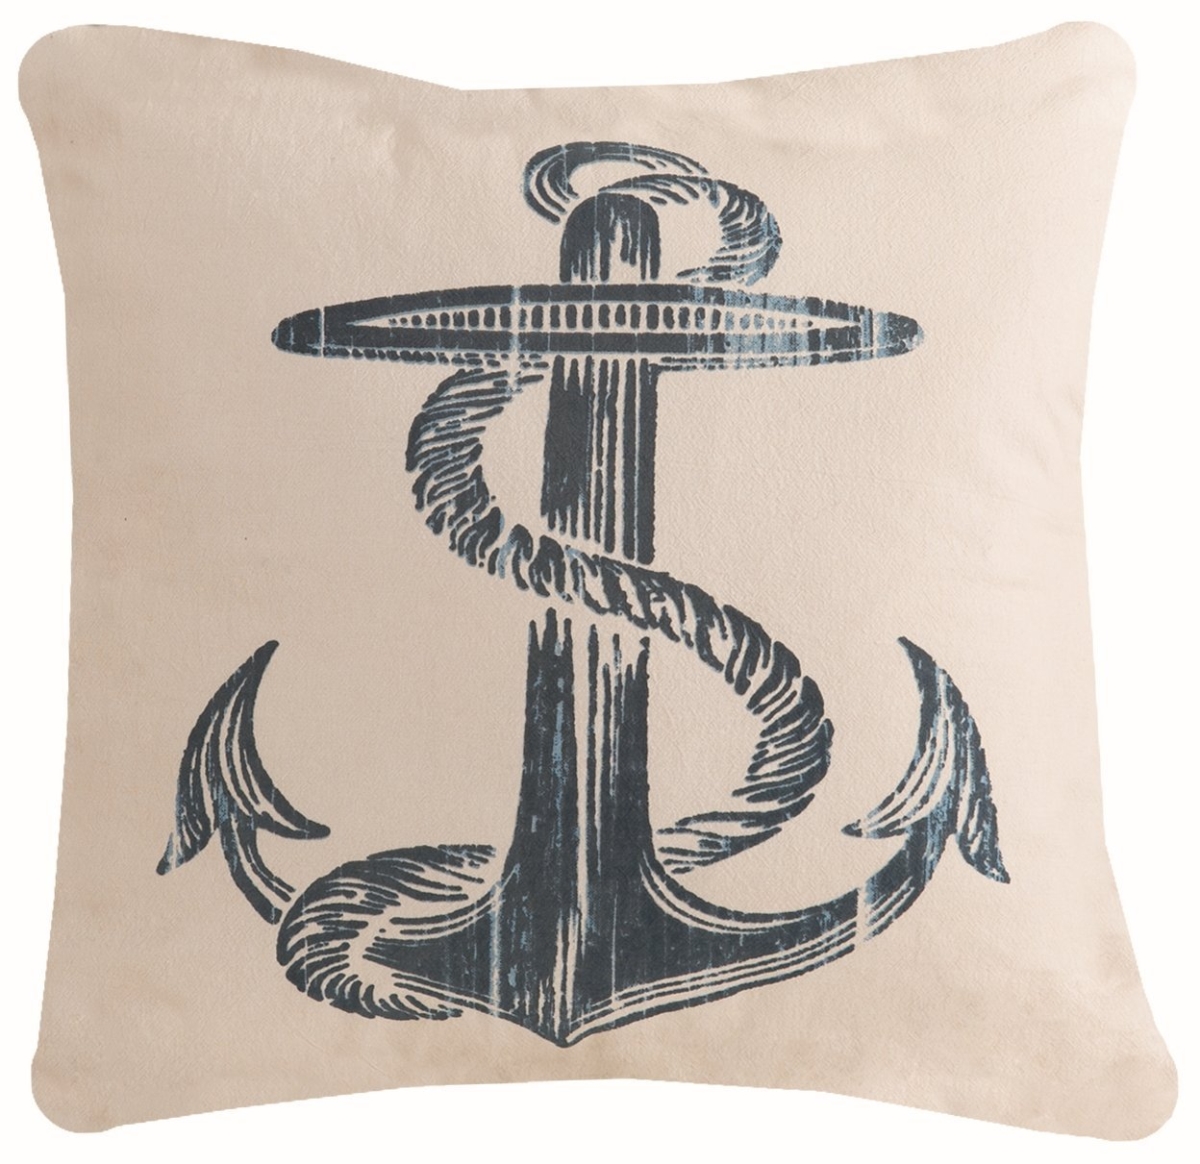 Lace Anchor Beach Living Pillow, 18 X 18 In.